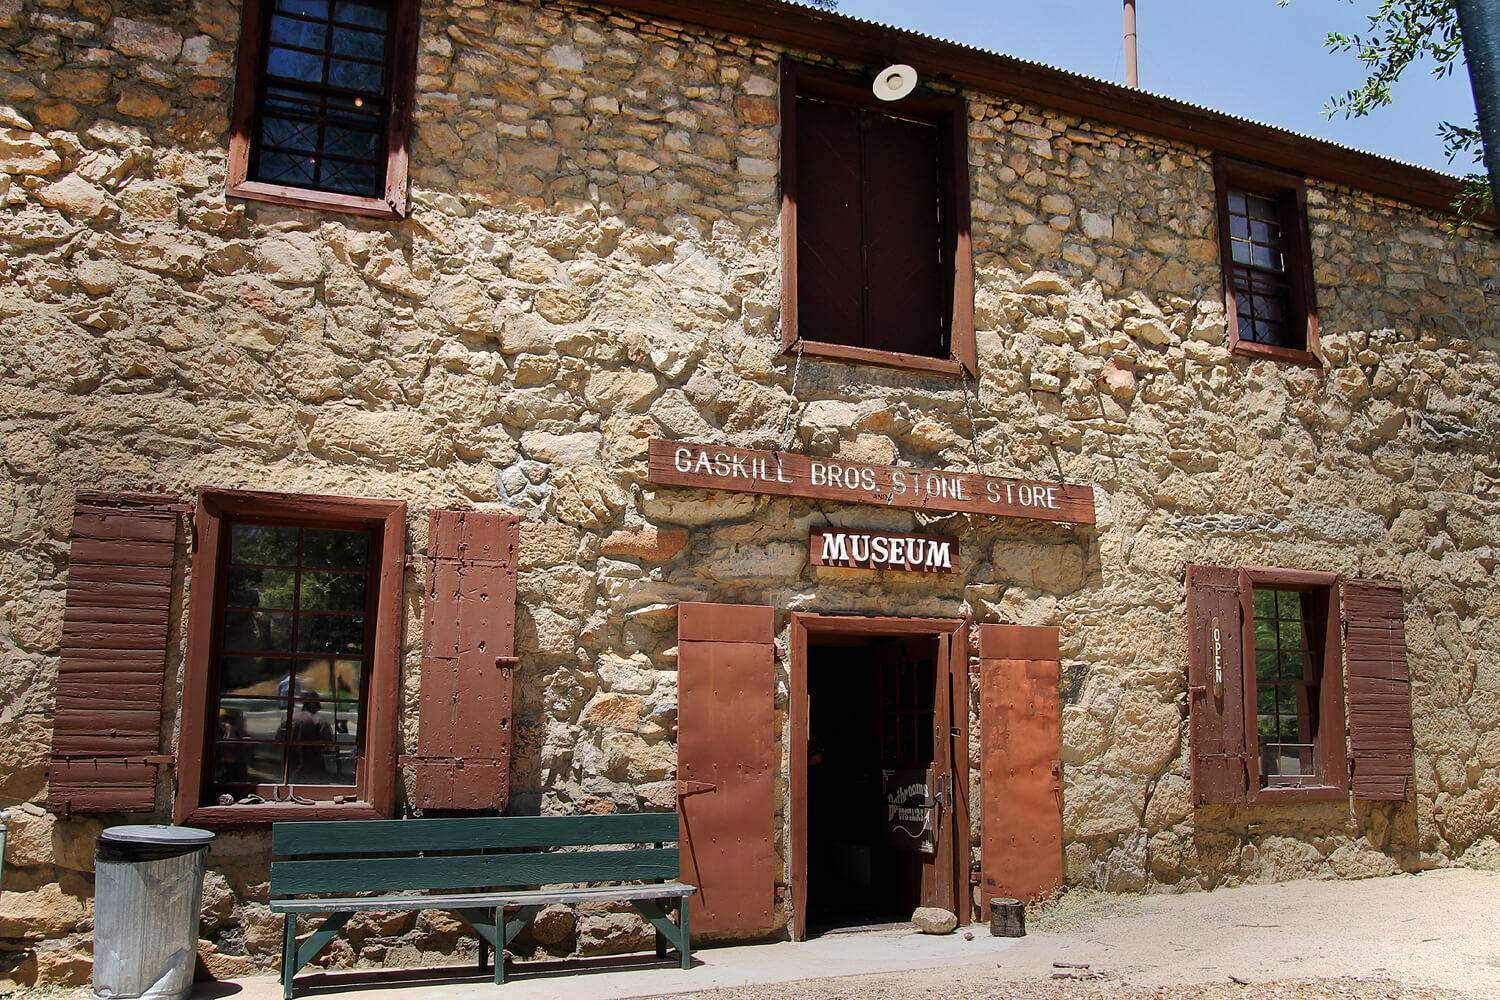 The Campo stone store museum was the result of a raid by border bandits in 1875. The store decided to re-build their store into a stone “fortress” to ensure protection from future issues.